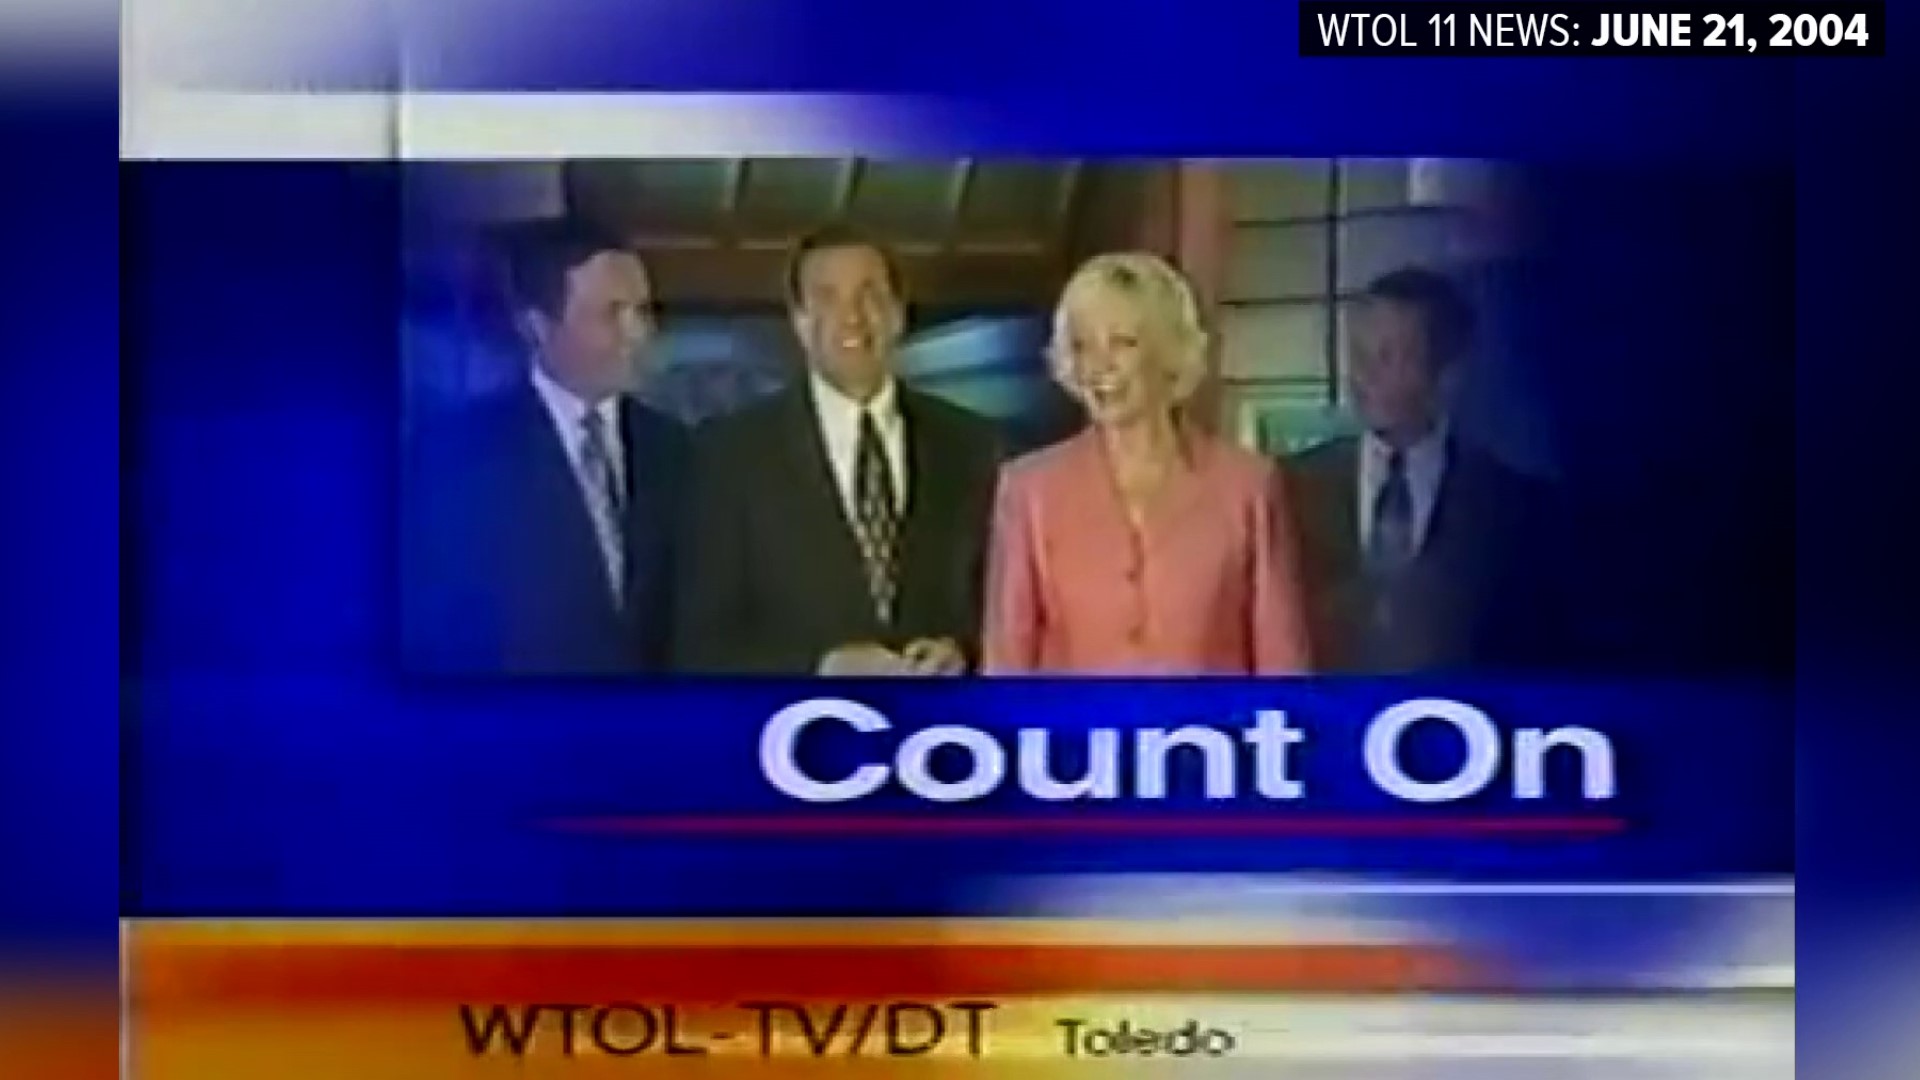 June 21, 2004: WTOL News 11 at 6 p.m. Join Terry Thill, Chrys Peterson, Robert Shiels and Joe Rychnovsky for headlines, weather and sports from Toledo's News Leader.